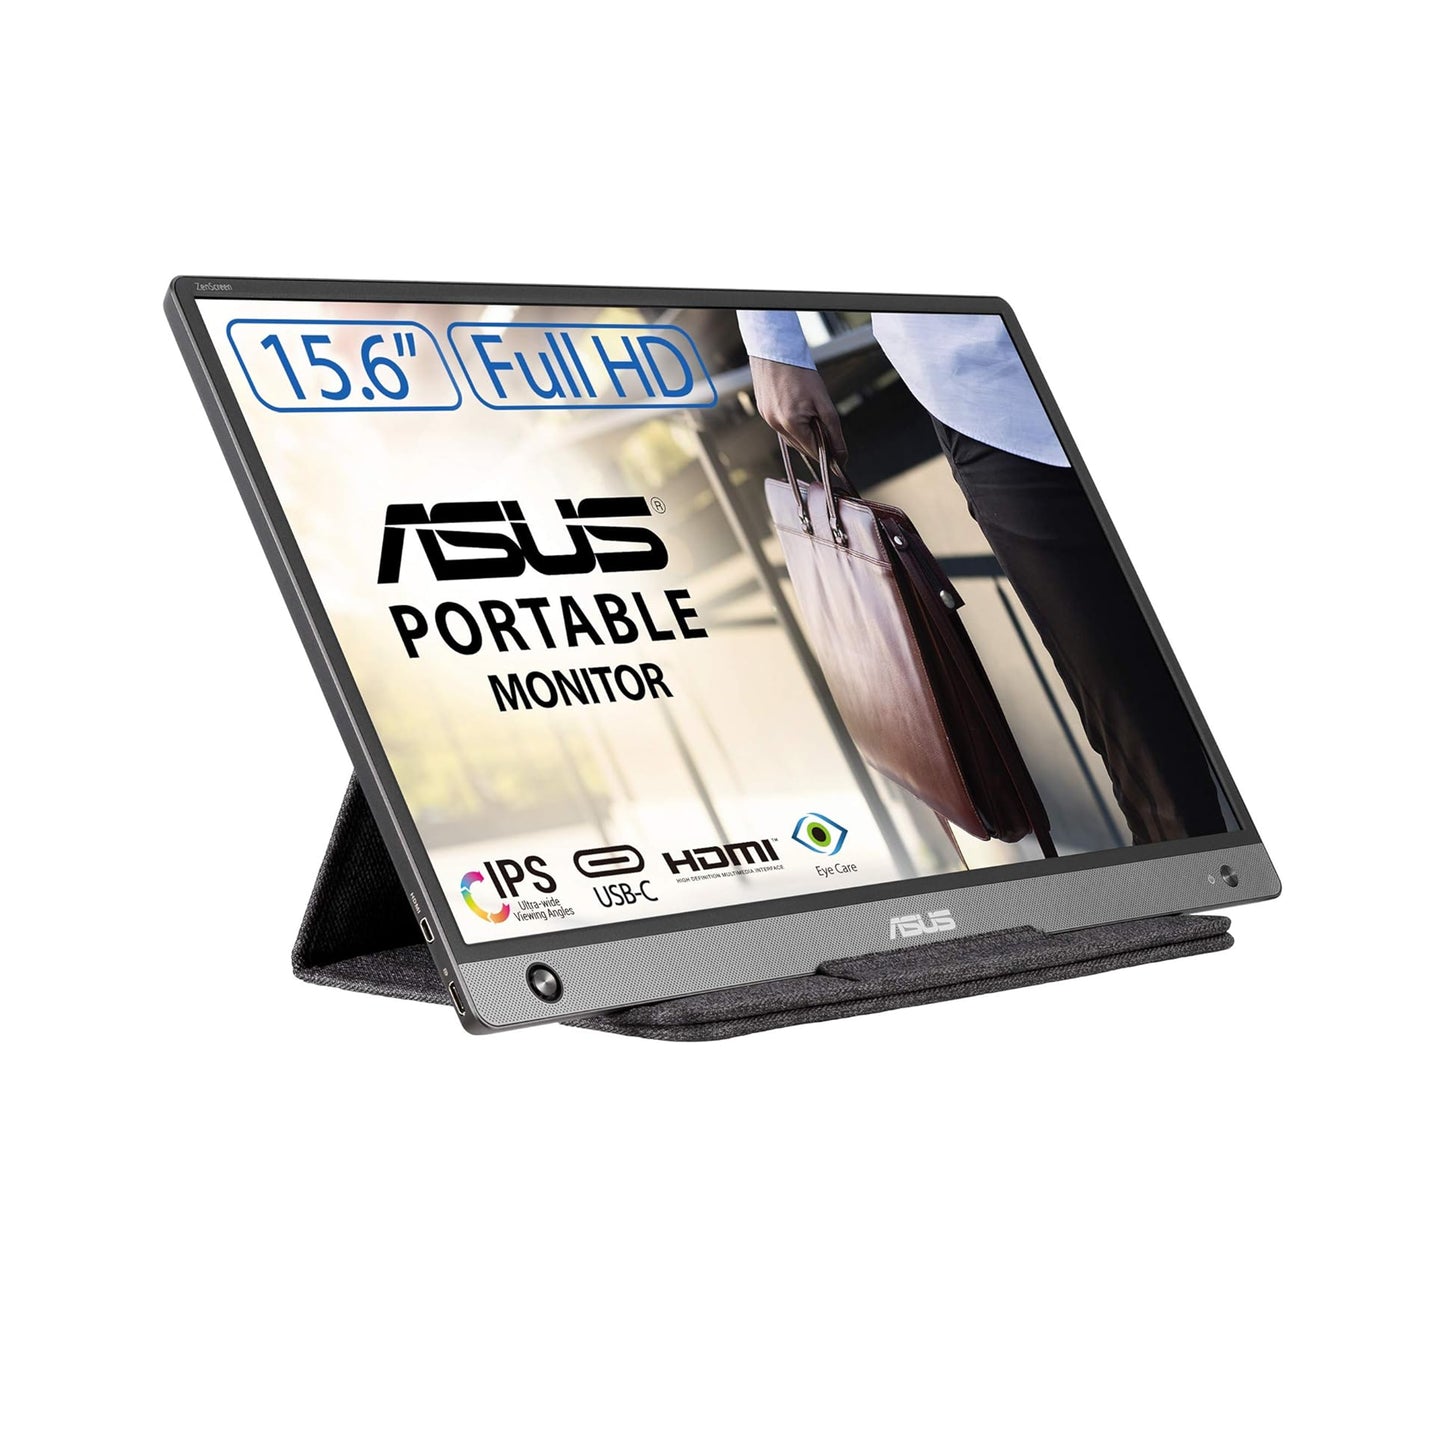 ASUS ZenScreen 15.6” 1080P Portable USB Monitor (MB16AH-Z) - FHD, IPS, USB Type-C, Micro-HDMI, Eye Care, Speakers, Tripod Mountable, Anti-Glare Surface, Protective Sleeve